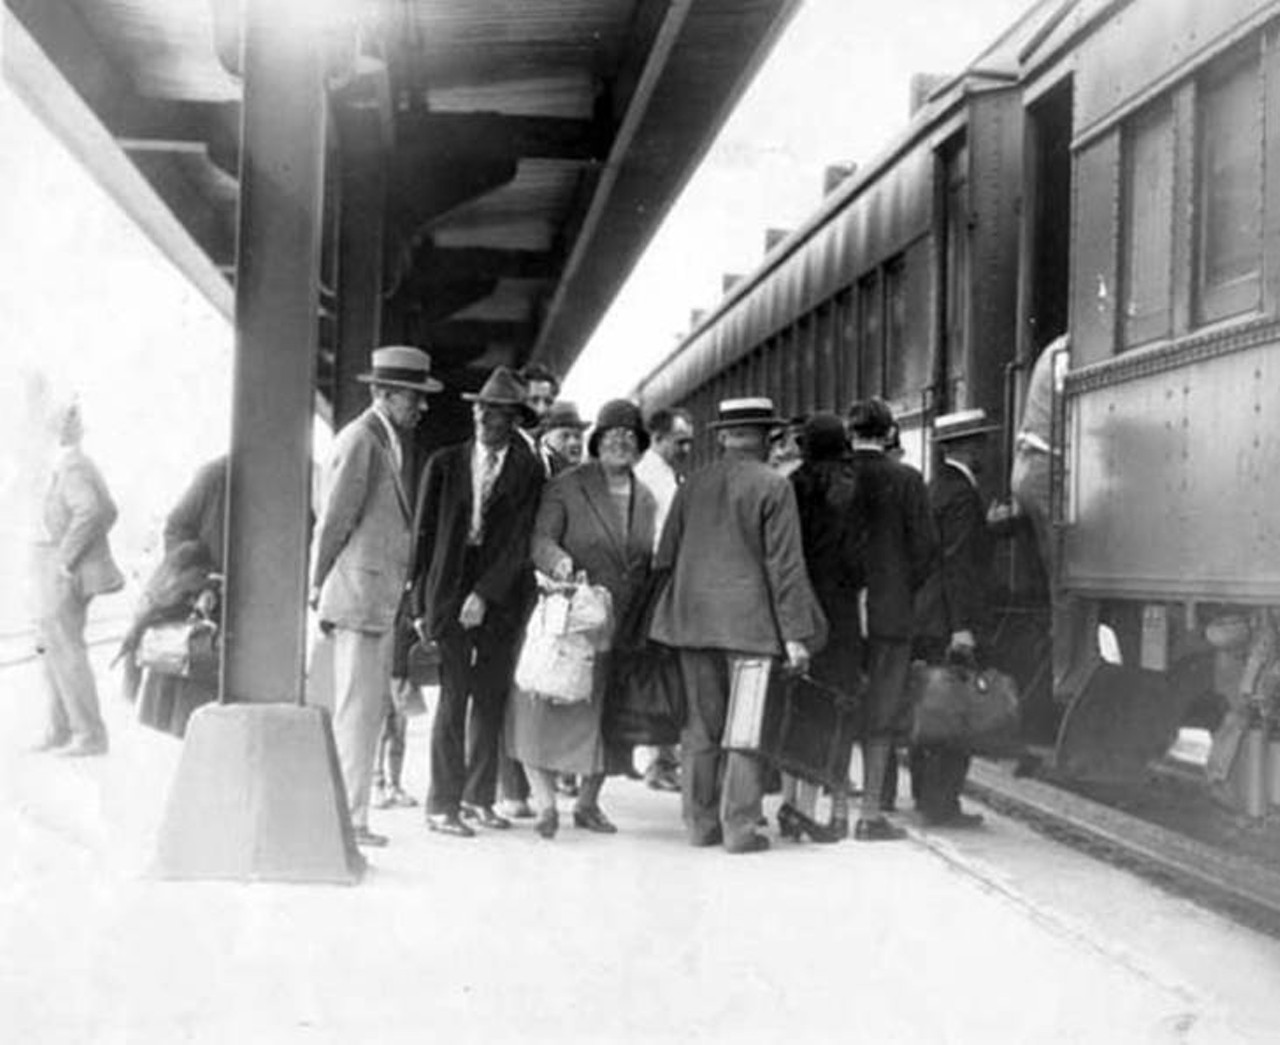  Commuters at East Cleveland Railroad Station, 1930 